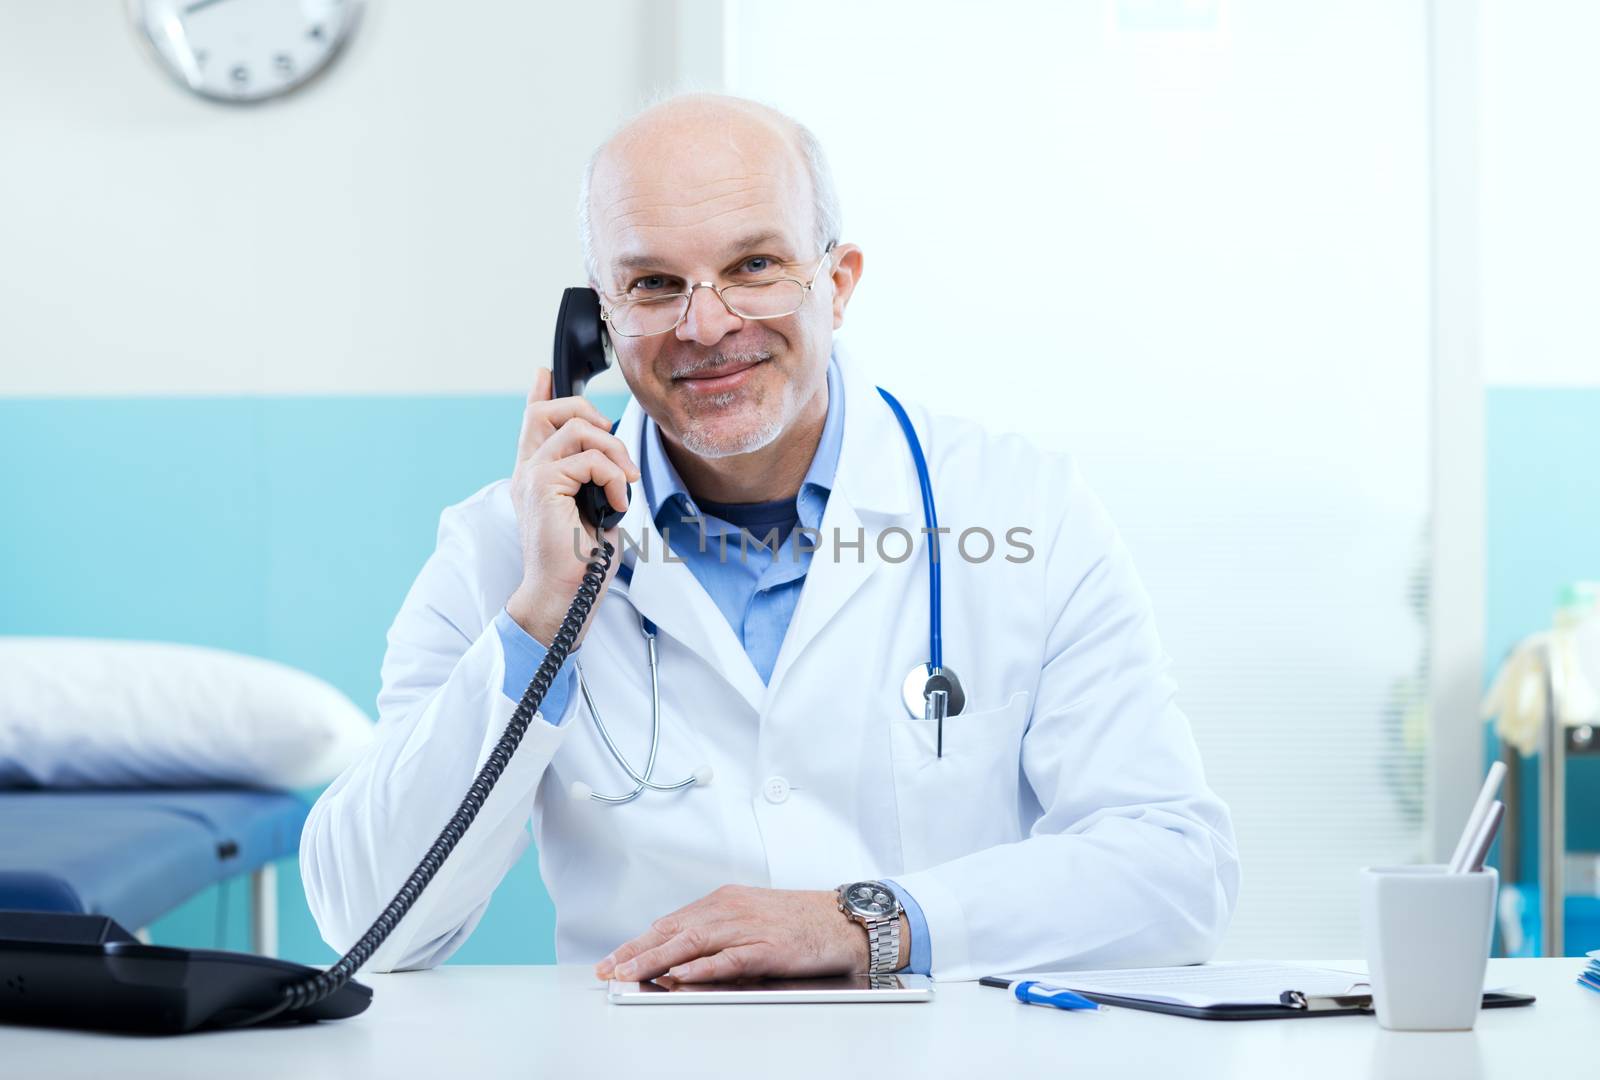 Doctor talking on the phone with medical equipment in the background.